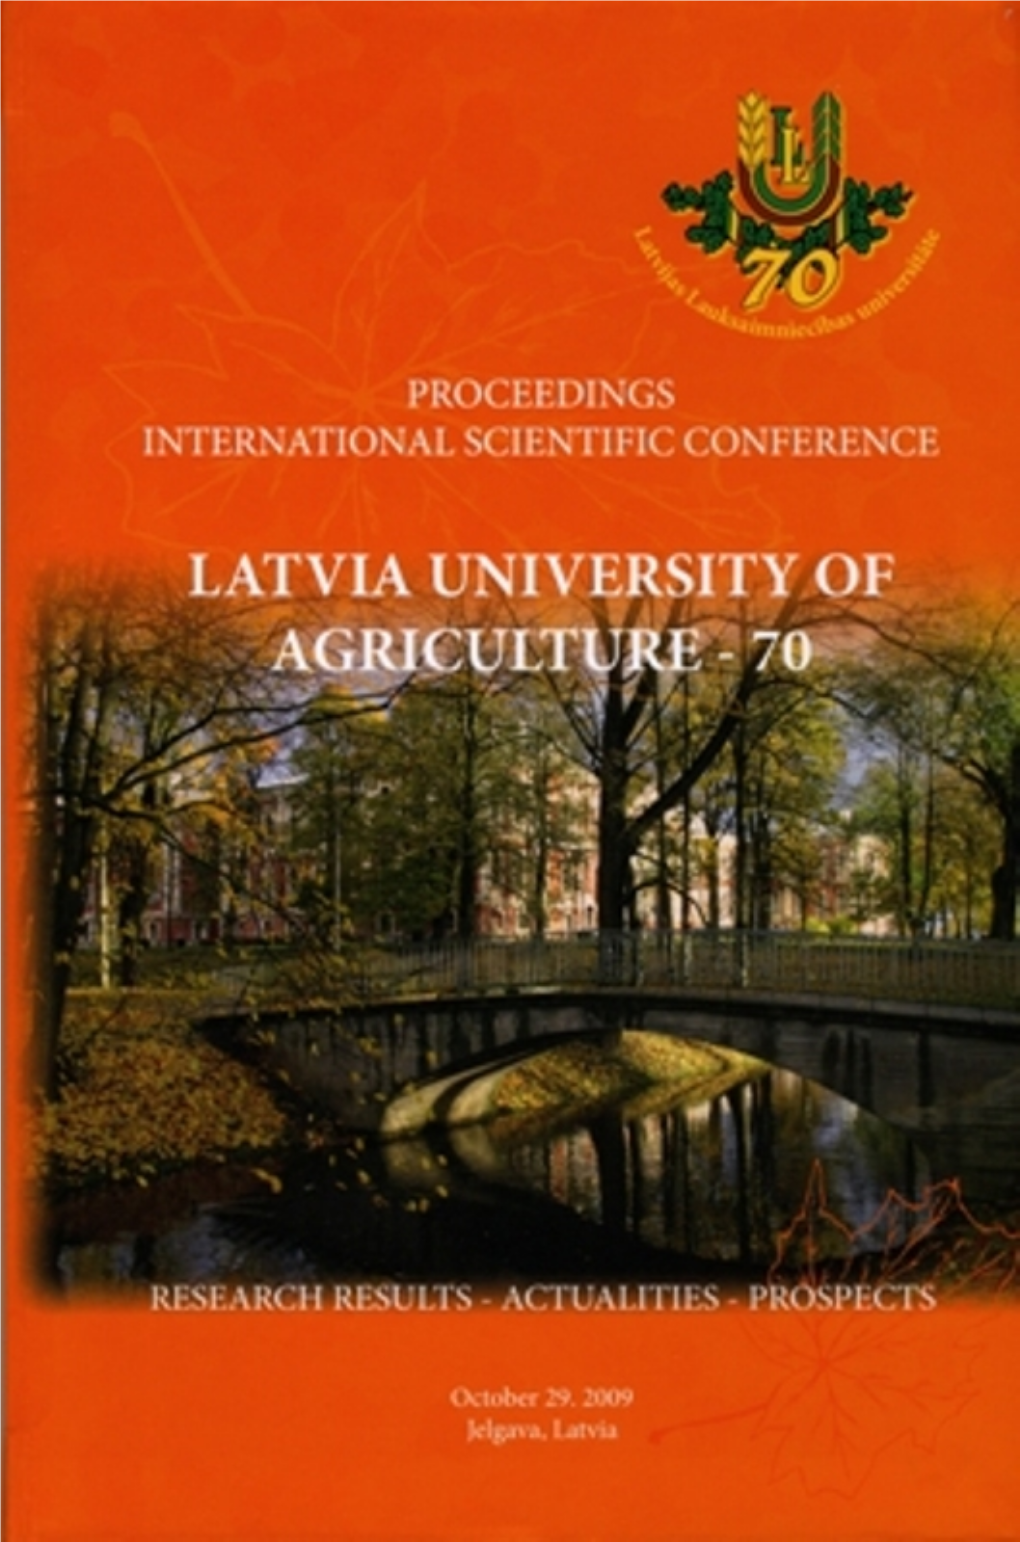 Latvia University of Agriculture – 70